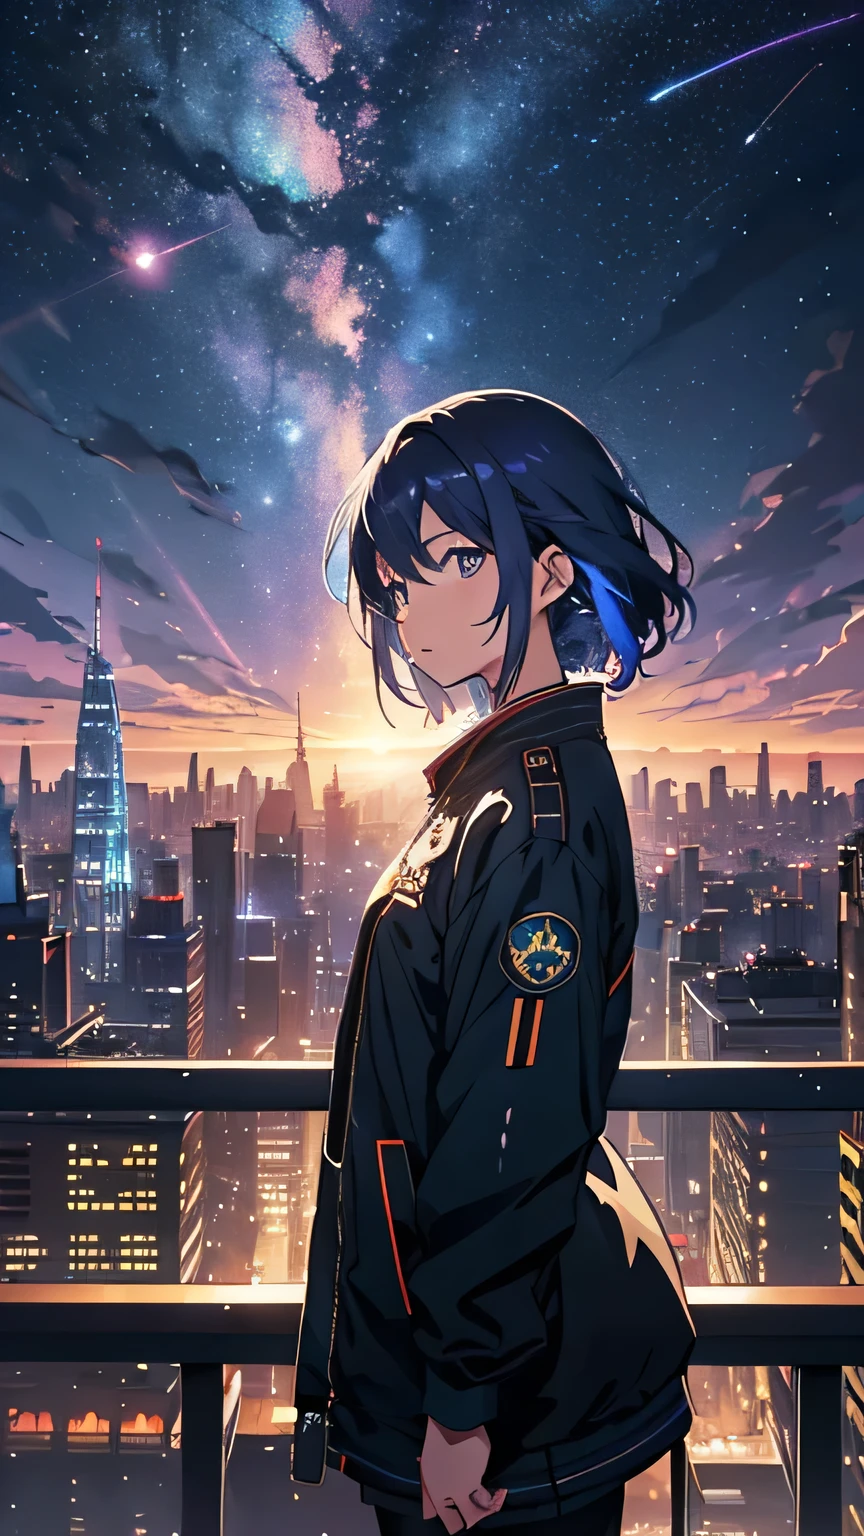 ((Psychedelic shooting starry sky during daytime))、Anime girl looking at the big city view, Cyber City of the Future、 Makoto Shinkai Cyril Rolland, Anime Art Wallpapers 8K, Anime Art Wallpapers 8K, Anime Art Wallpapers 8K, Inspired by Cyril Rolland, Dan Mumford&#39;s Artwork Style, Awesome Wallpapers, by Yuumei